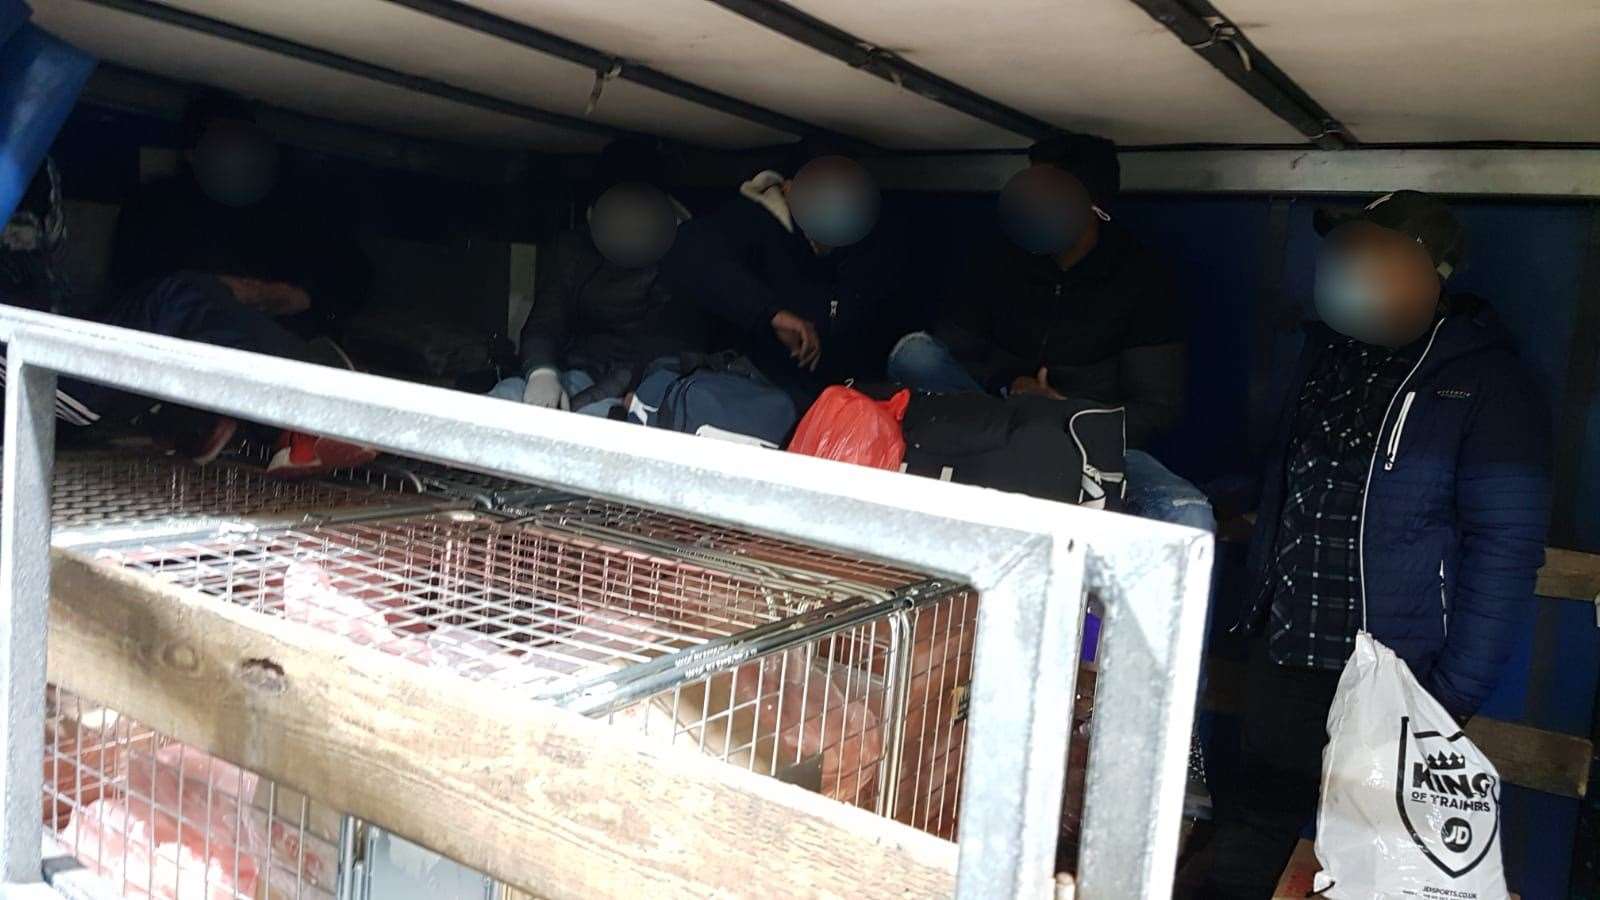 Nine people were found in the lorry